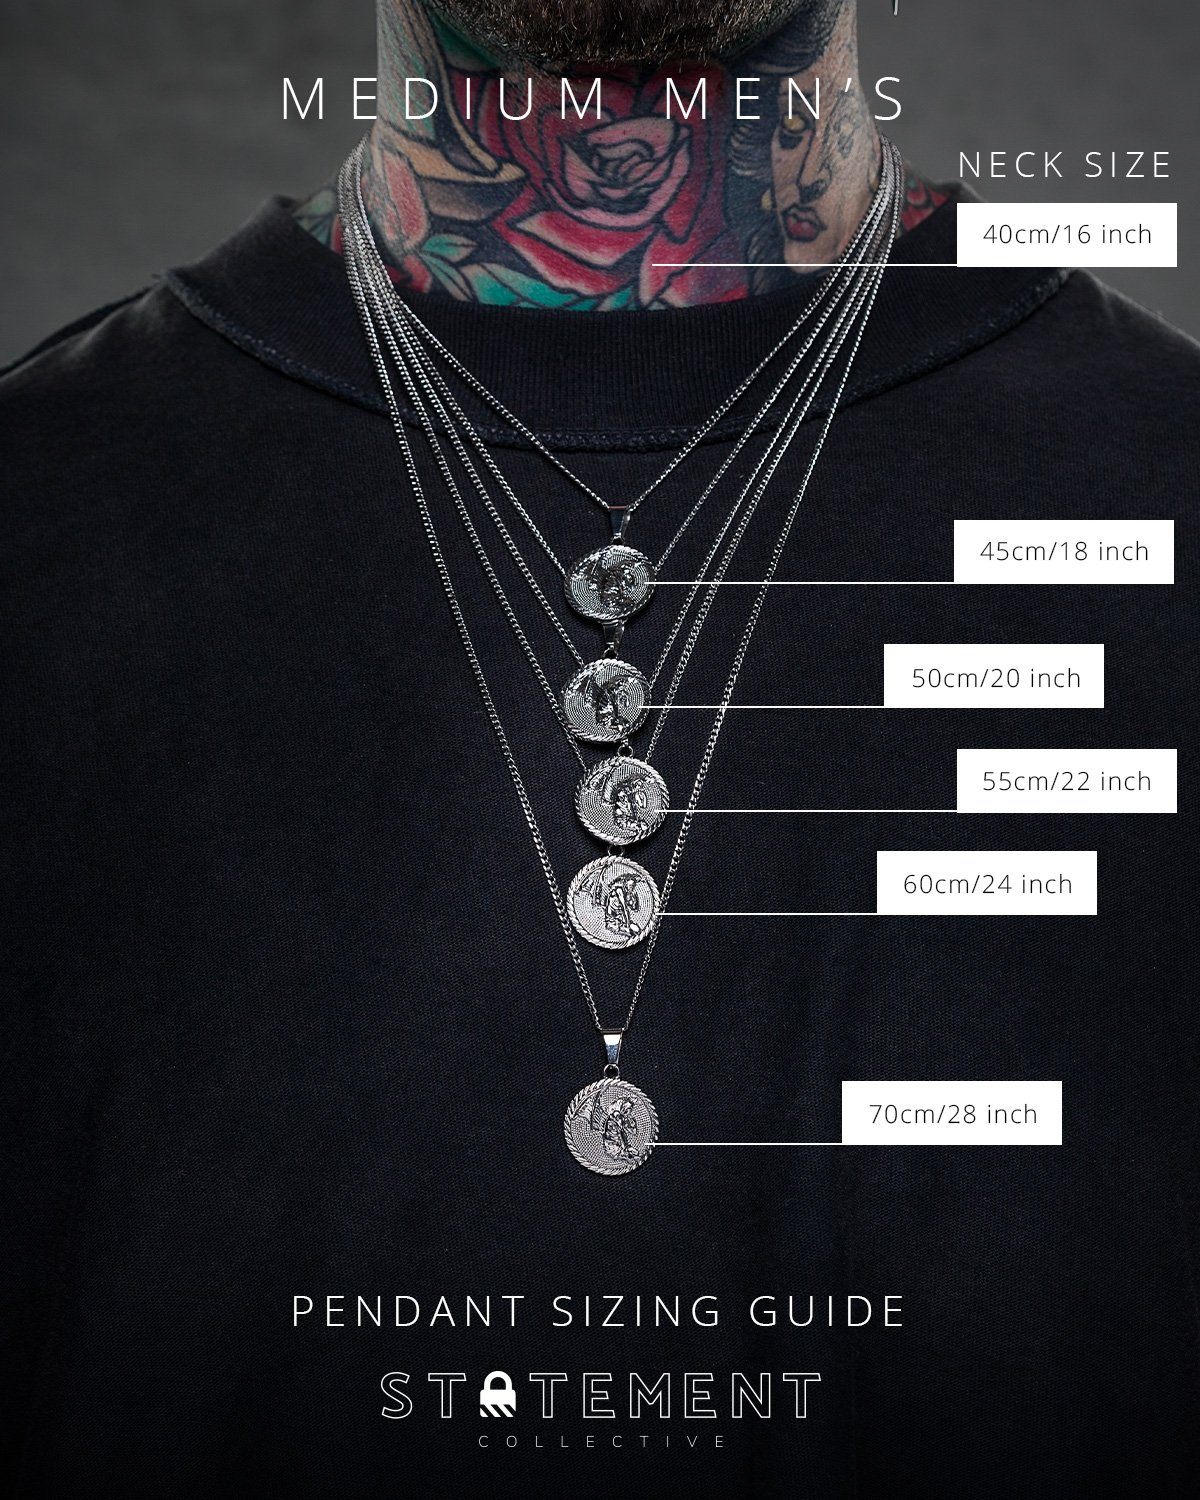 Mens pendant necklace sizing examples